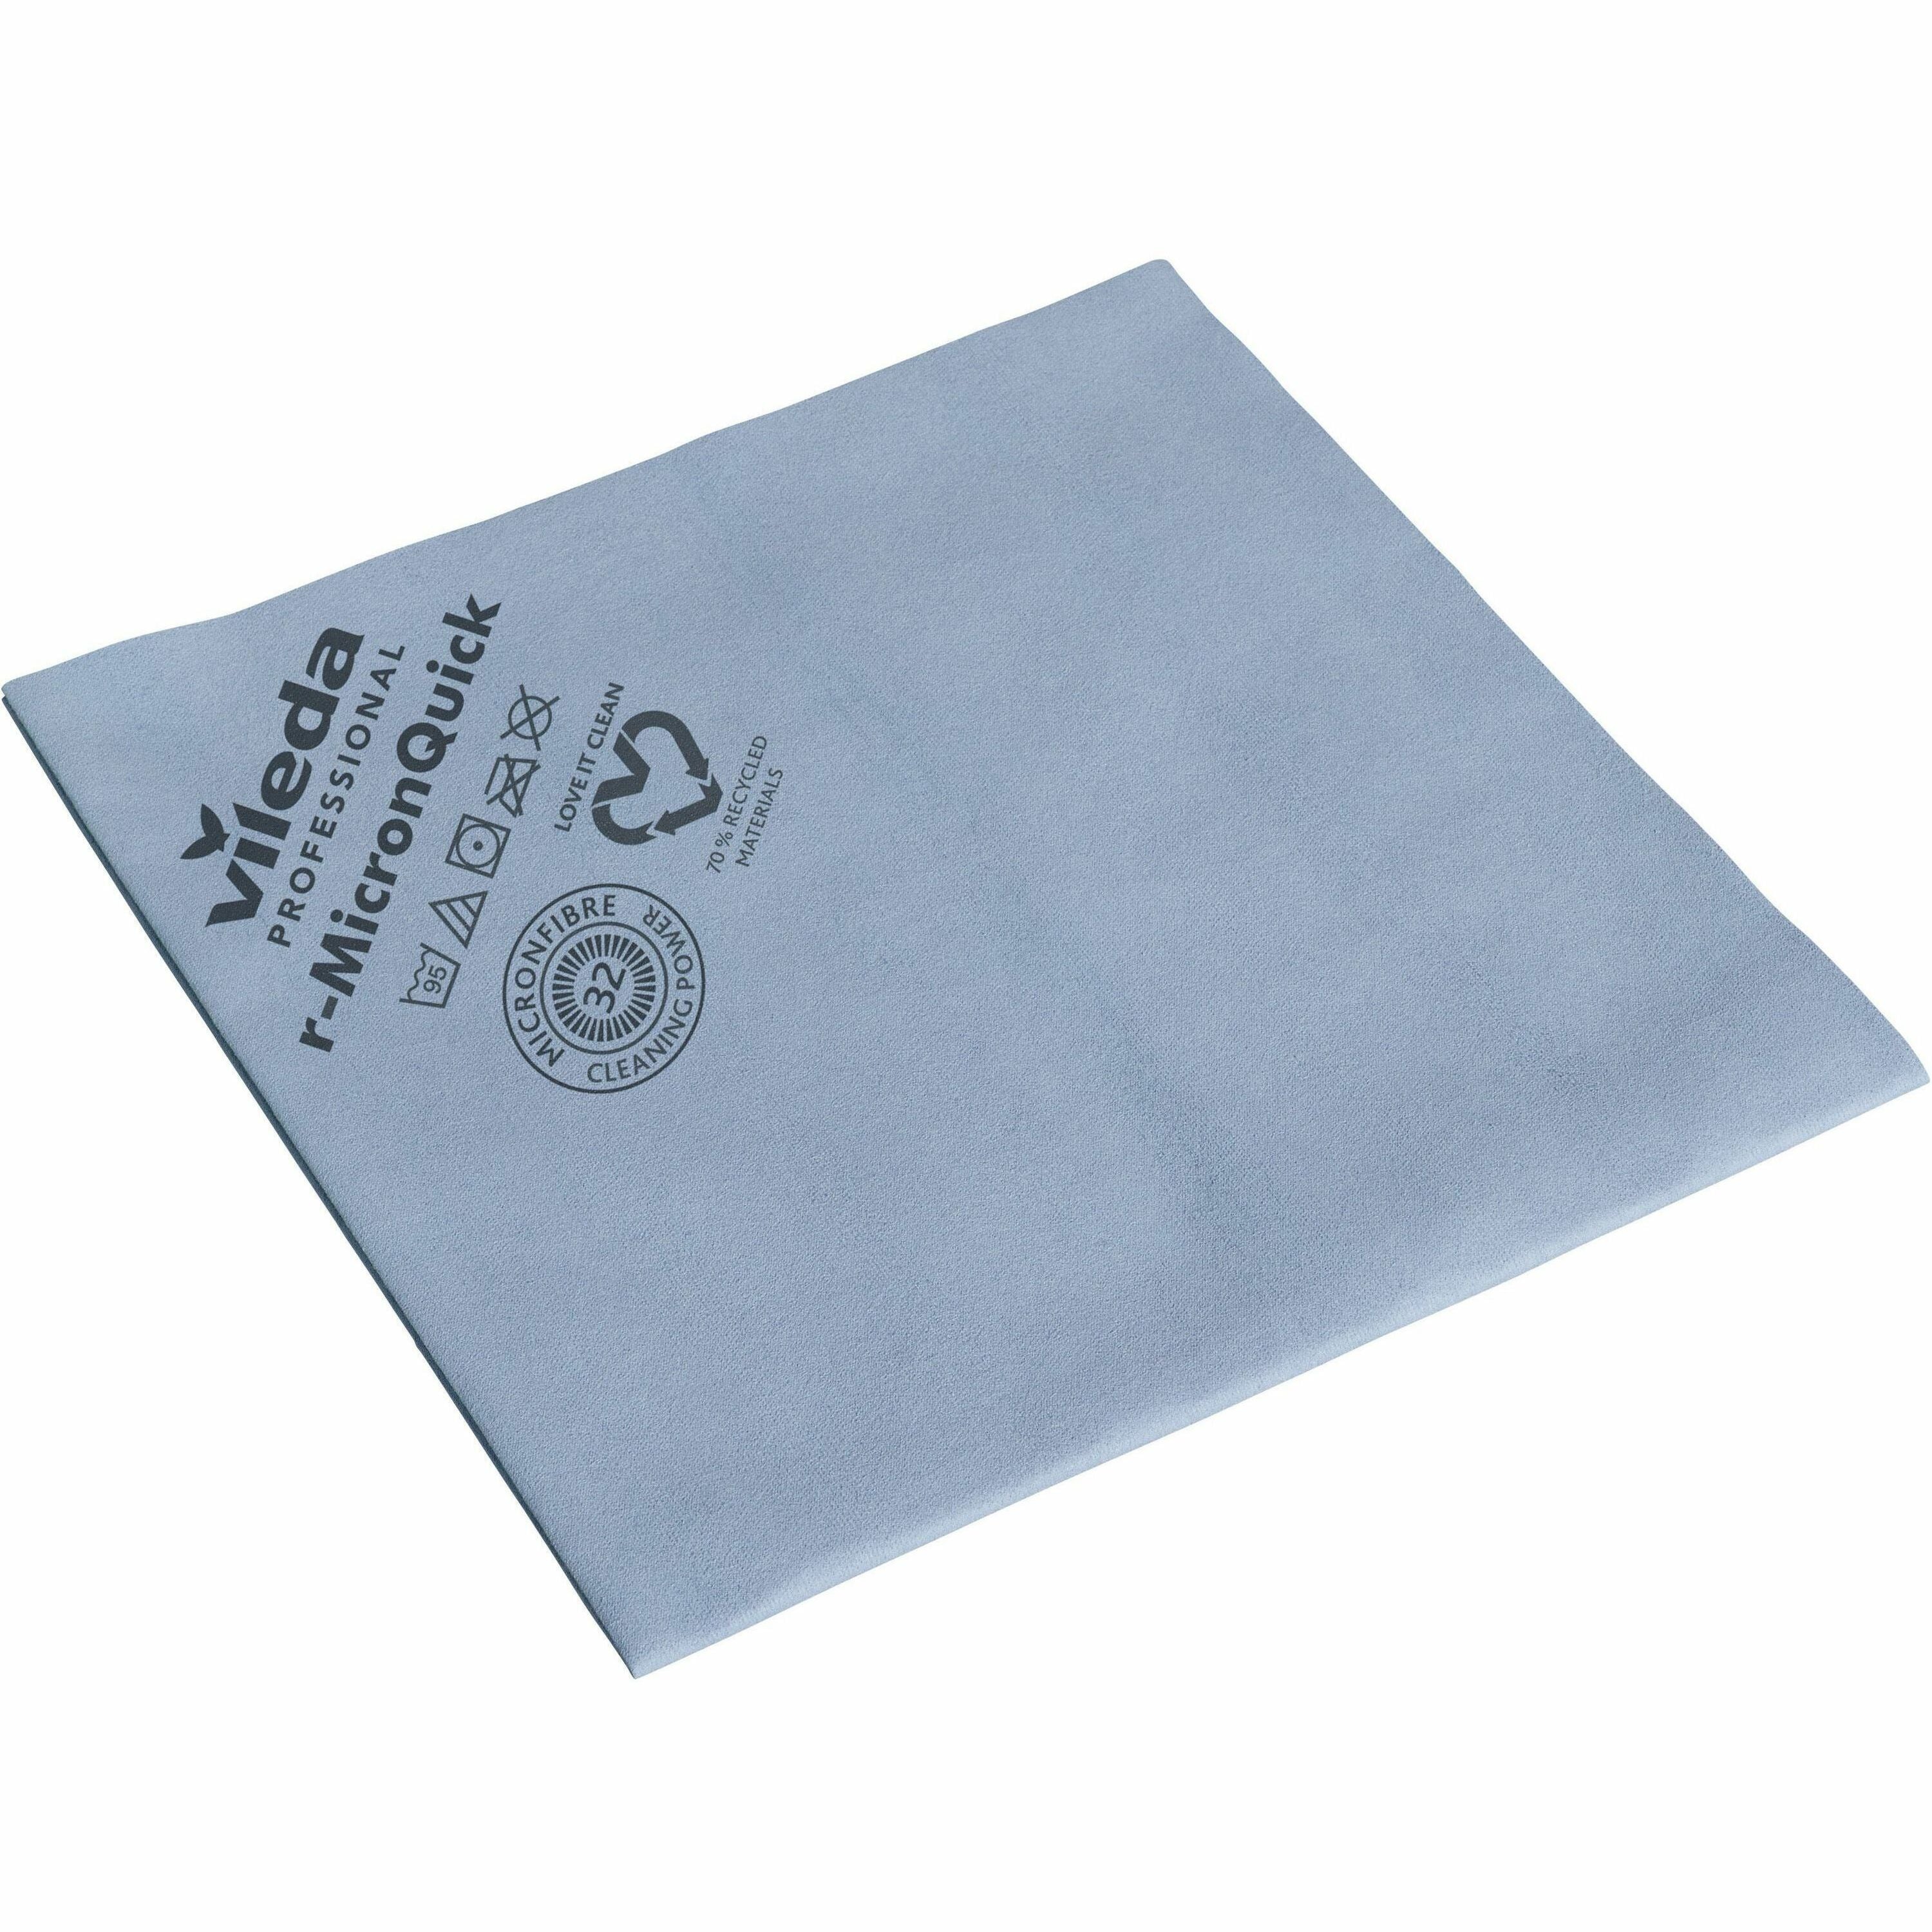 vileda-professional-micronquick-microfiber-cloths-1575-length-x-1496-width-5-pack-streak-free-hygienic-durable-washable-lint-free-absorbent-pvc-free-solvent-free-blue_vld170605 - 1